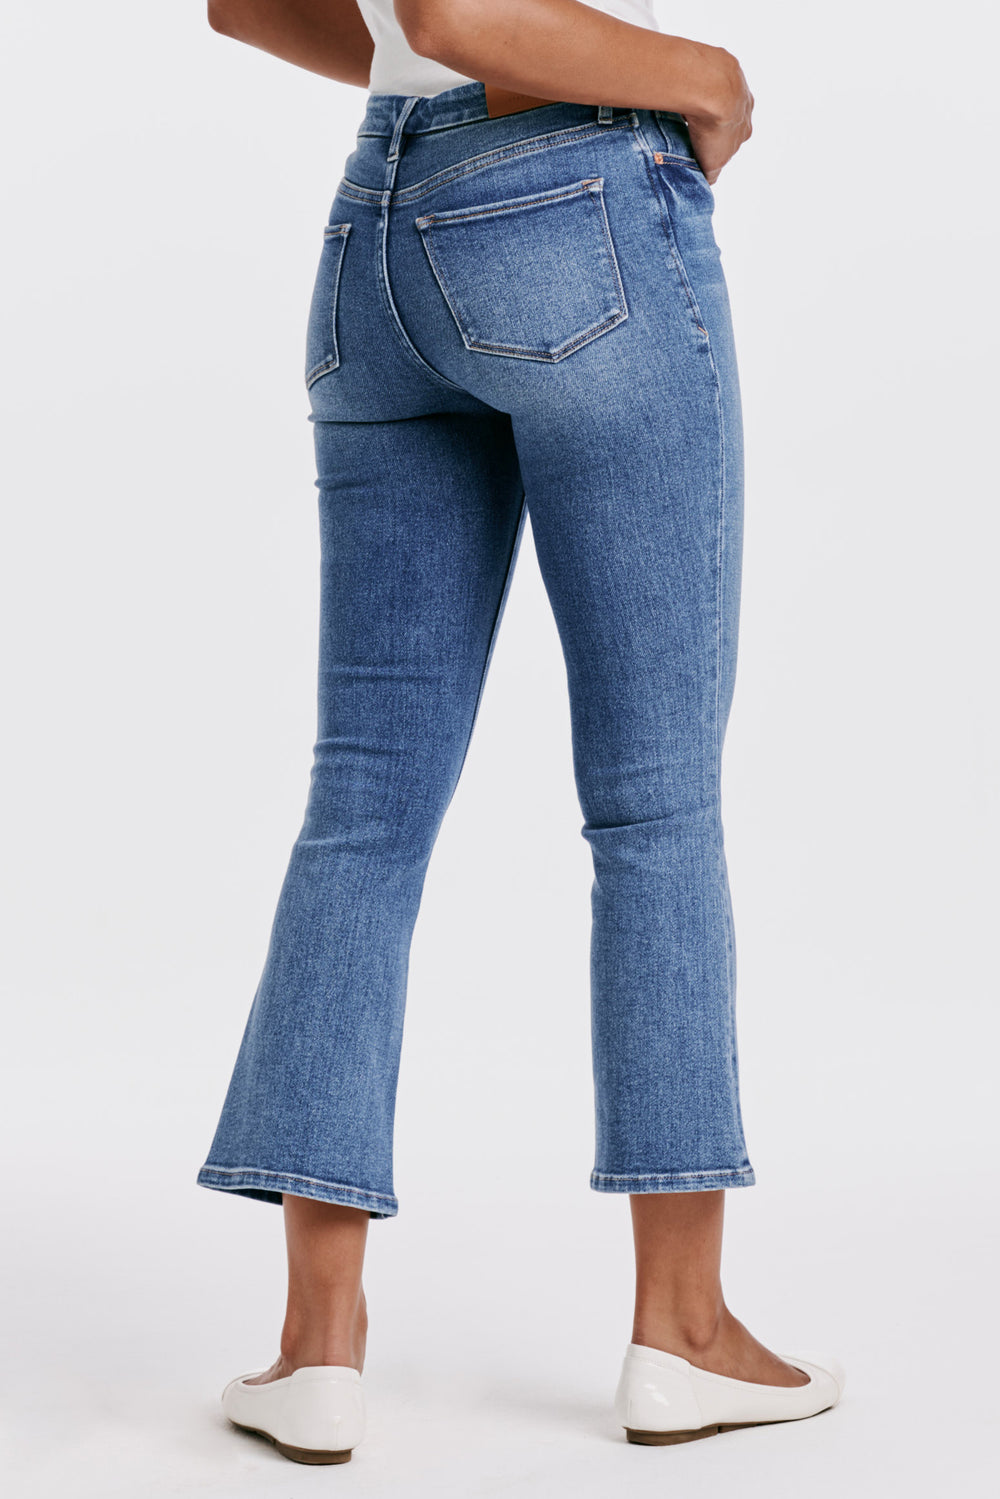 JEANNE CROPPED SUPER HI-RISE JEAN-WEXFORD - Kingfisher Road - Online Boutique